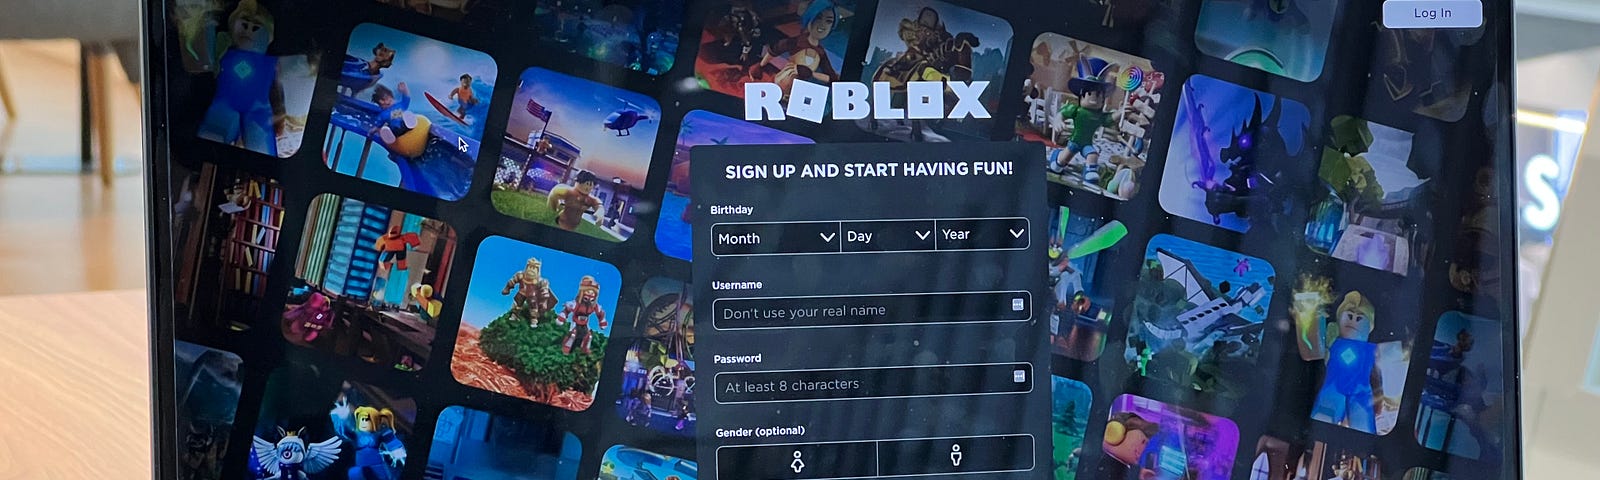 How to Play Roblox on a School Chromebook?, by Amit Biwaal, ILLUMINATION